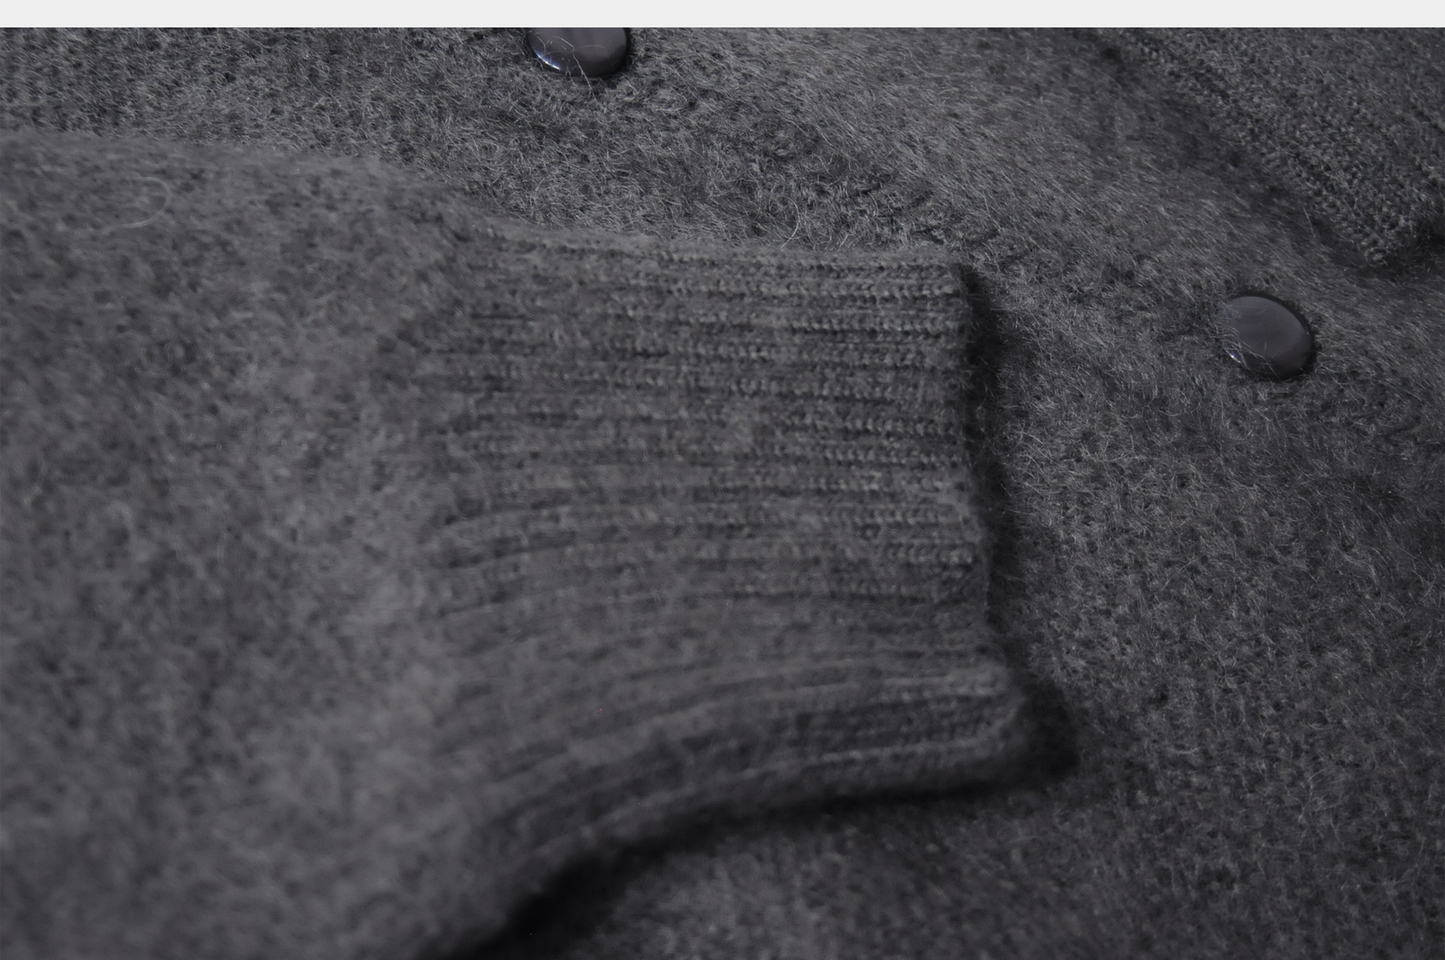 Mohair Cardigan Solid Charcoal